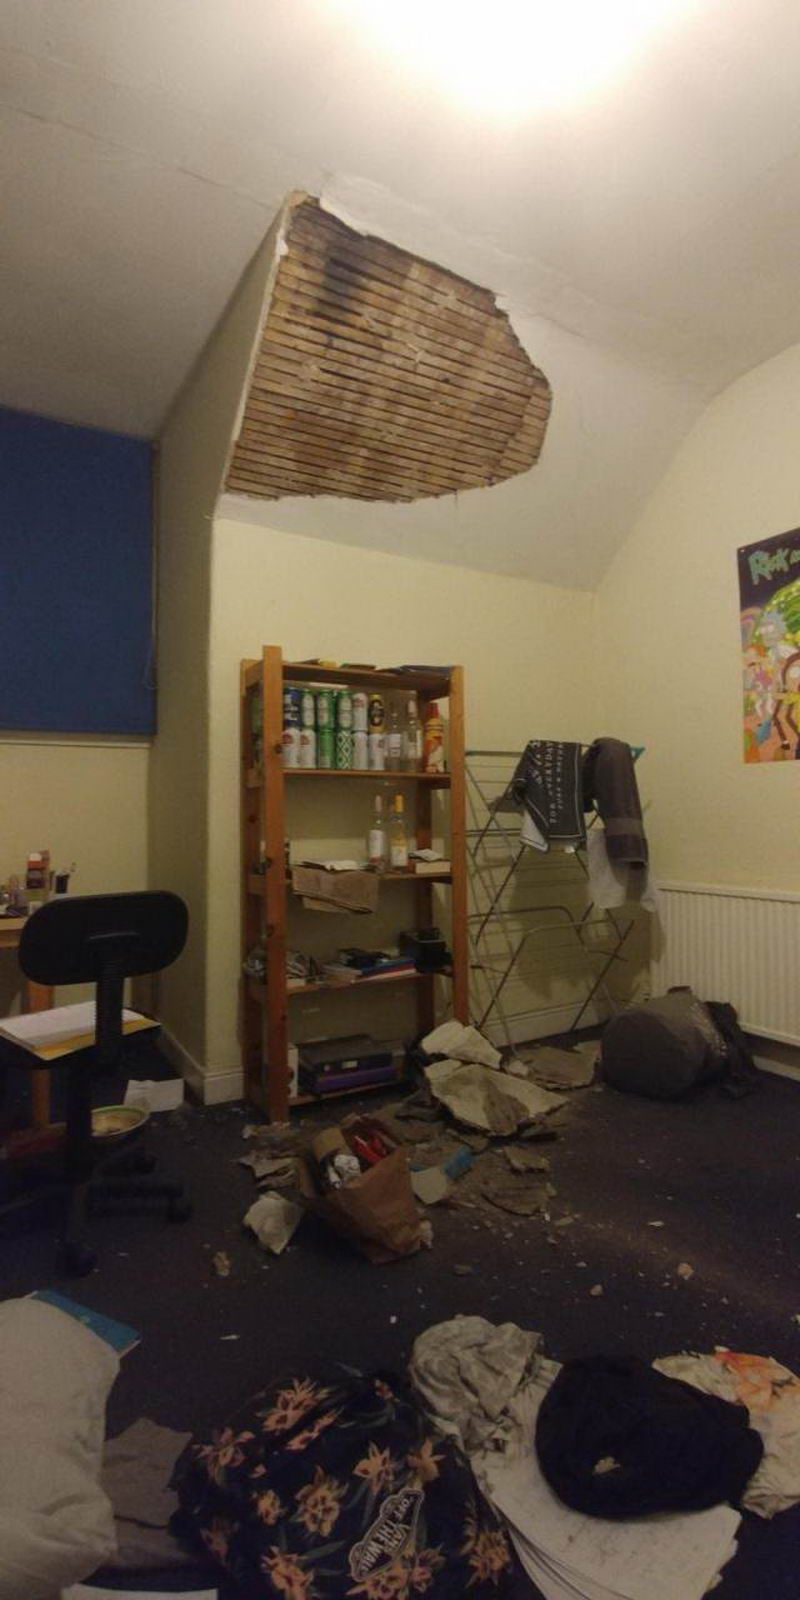 epic fails - collapsed ceiling - Nacred